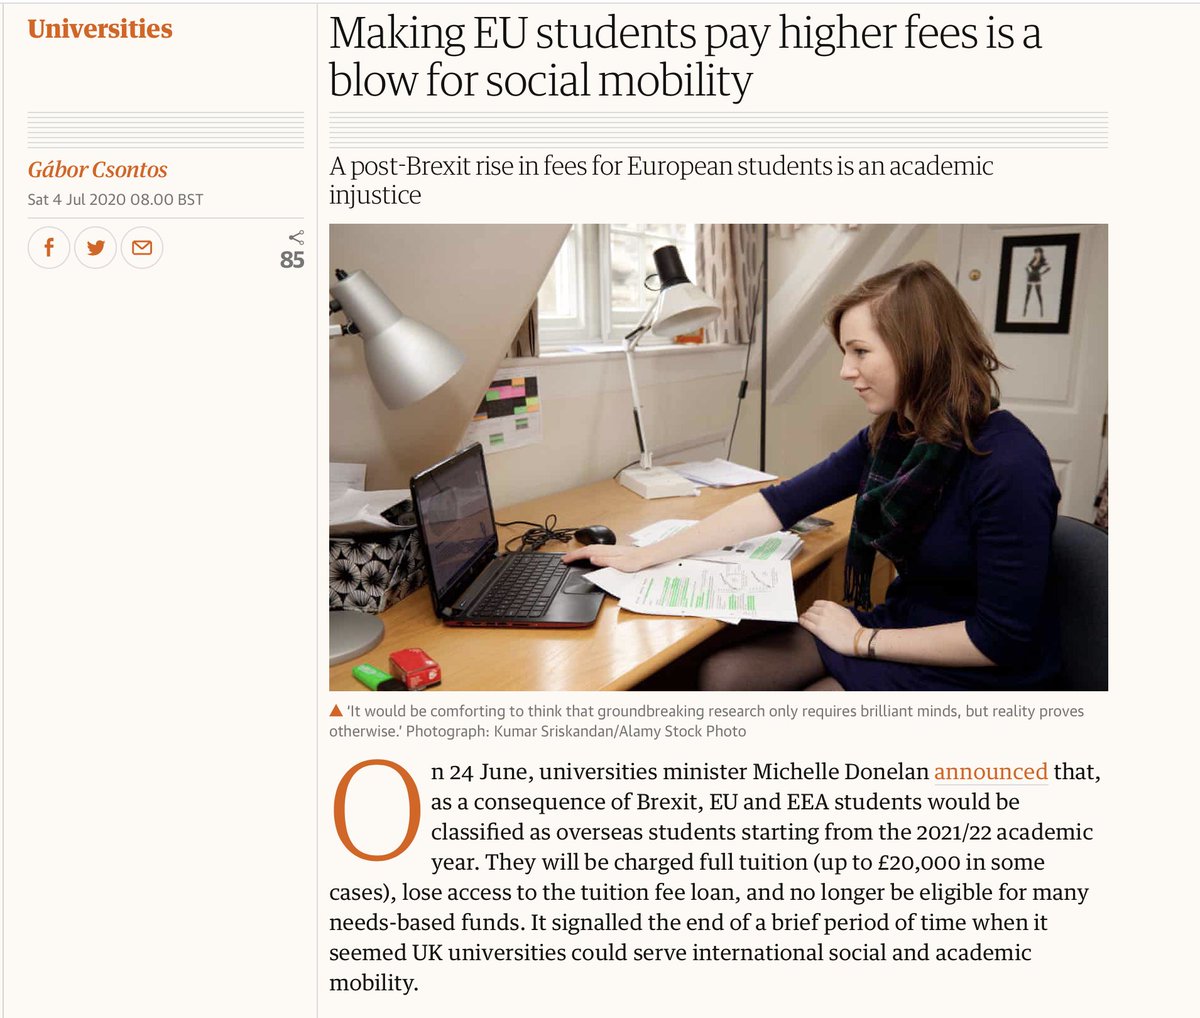 7. Removal of home fee status for EU studs will come at a huge "cost" for UK; it is a "blow for social mobility", as Gábor Csontos - recent  @cambridge_uni graduate and former access officer of the Hungarian Society there - wrote in the  @guardian (an excellent piece).